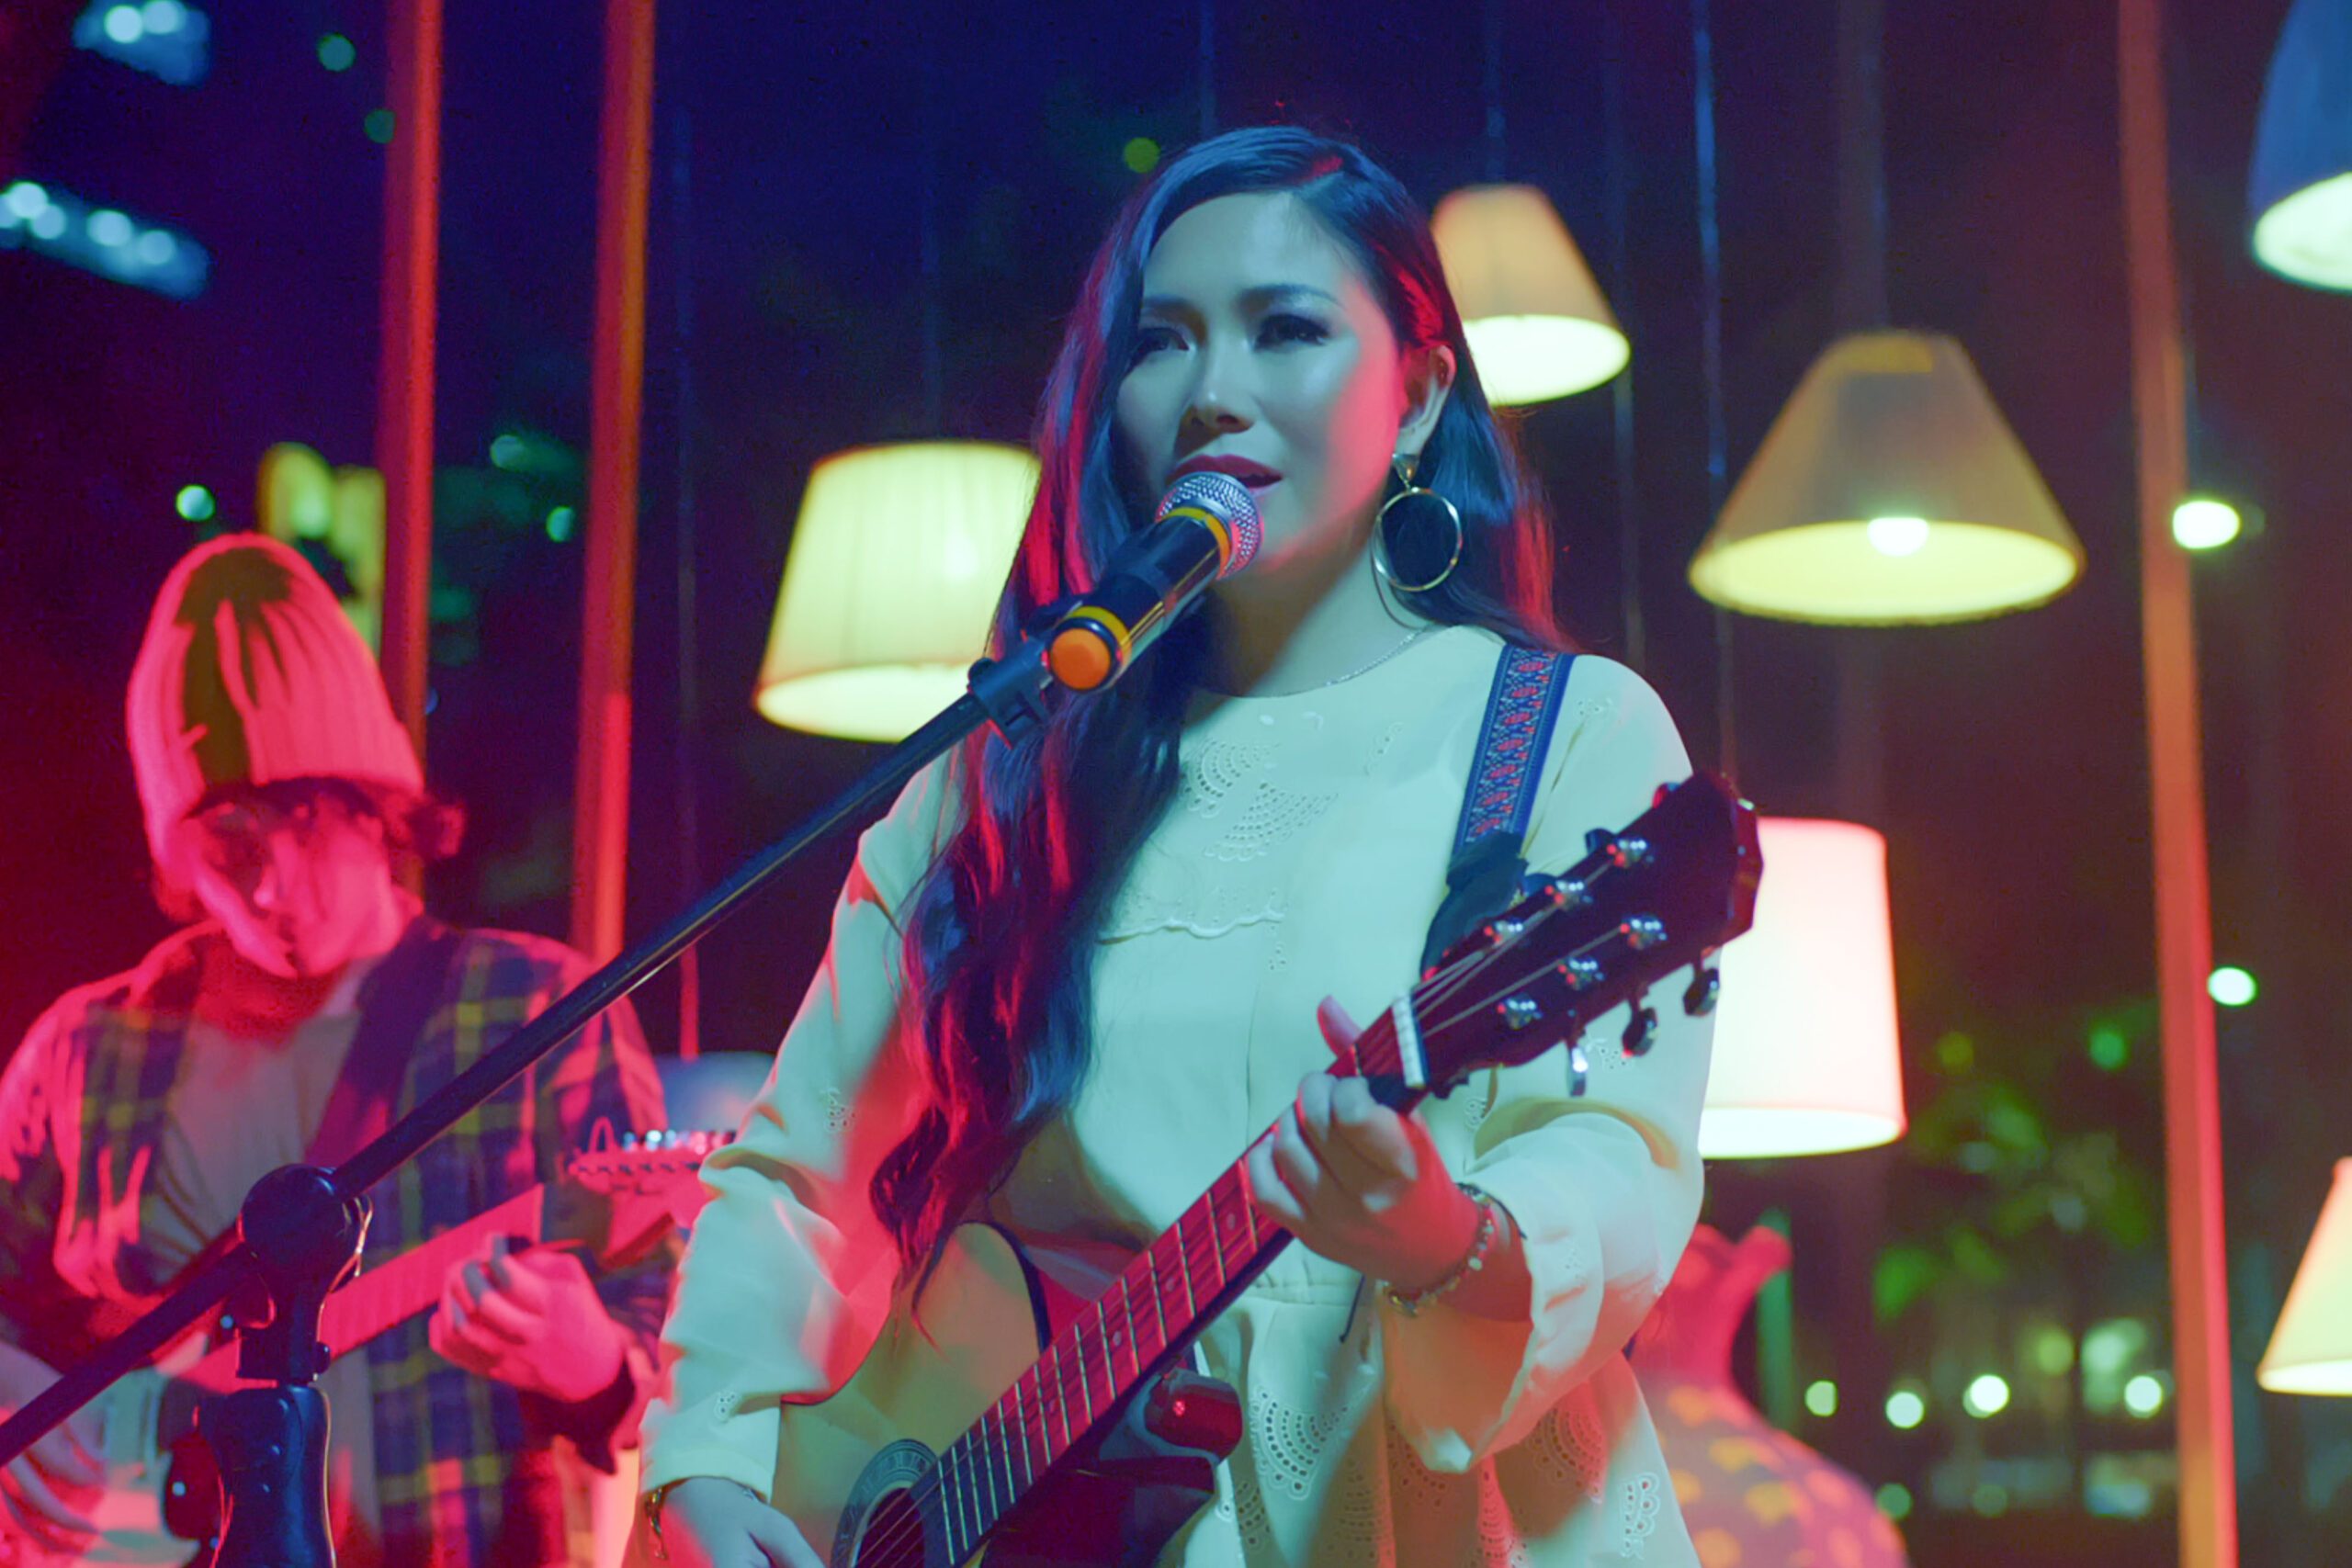 LISTEN: Yeng Constantino releases song ‘Ikaw Ang Akin’